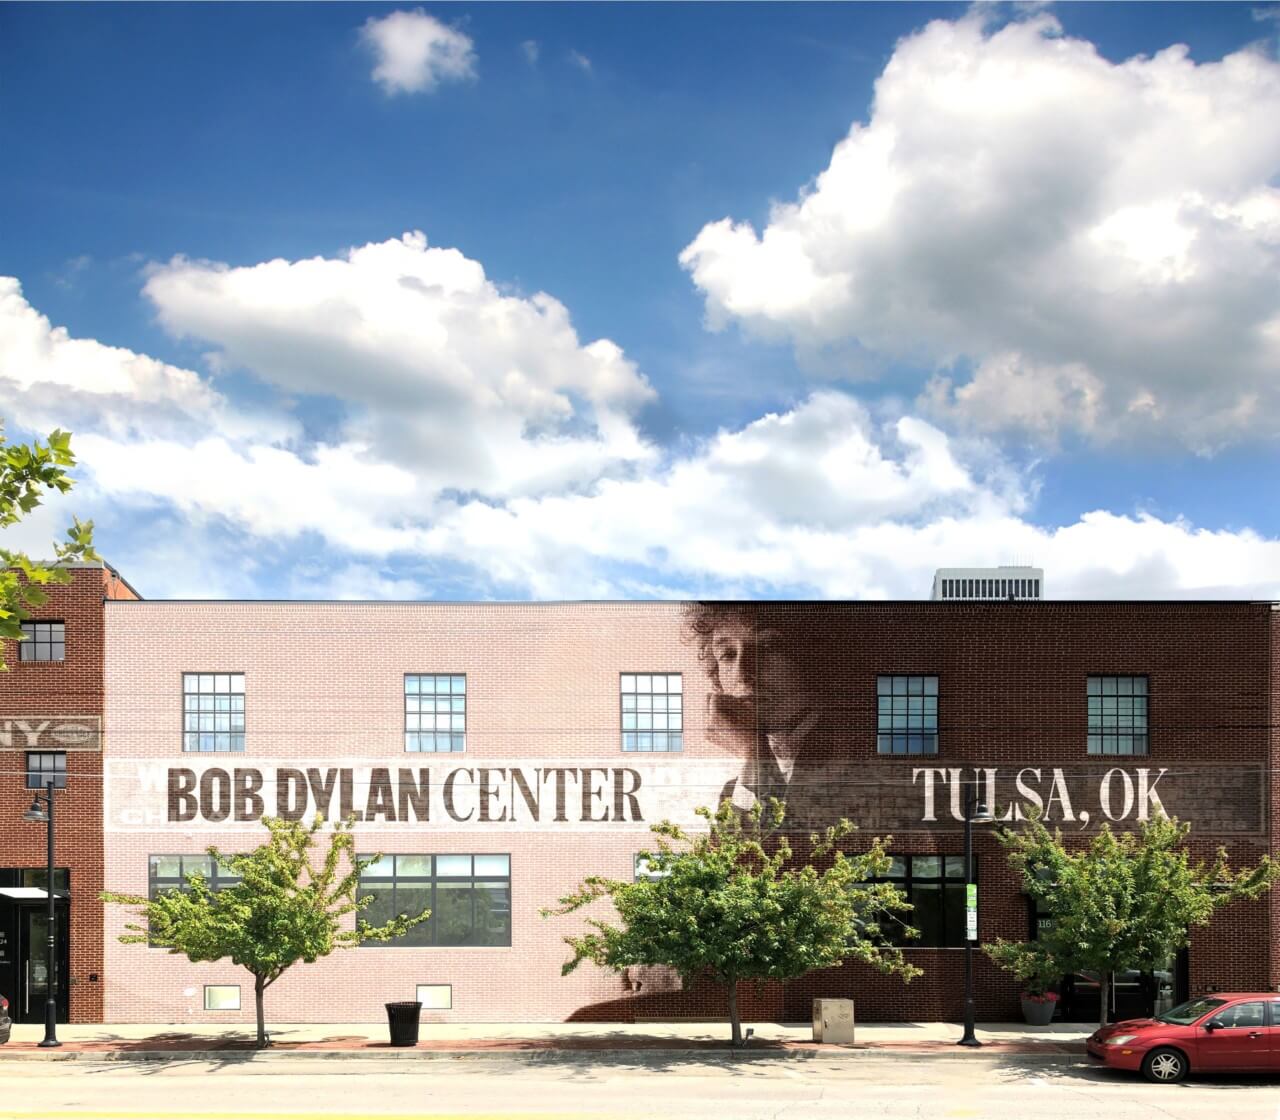 A pale pink building that says "Bob Dylan Center" in black type set against a blue sky with clouds